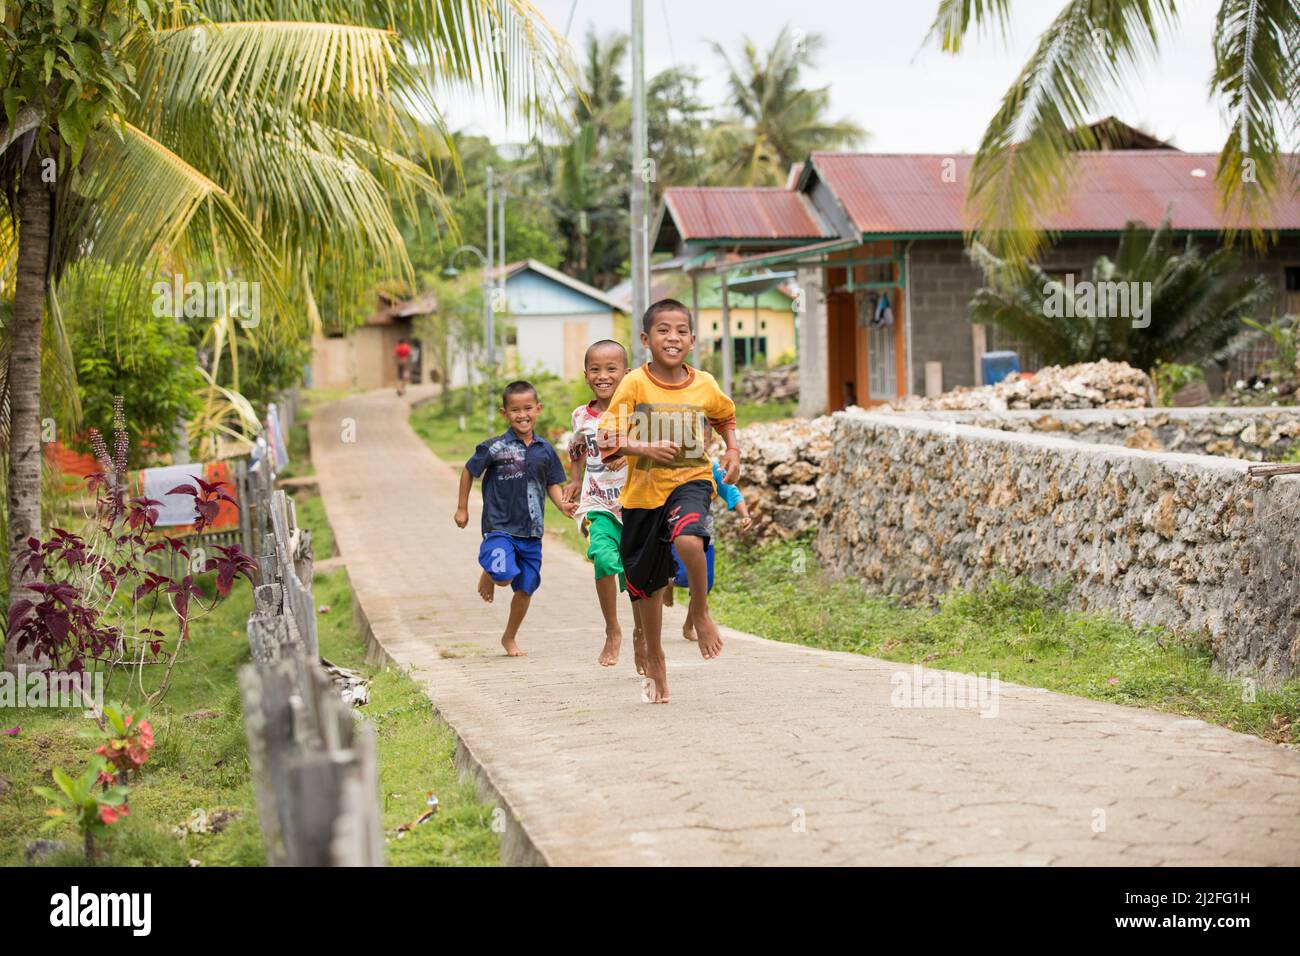 Children race down a village road on Karampuang Island, Indonesia, Asia. Stock Photo